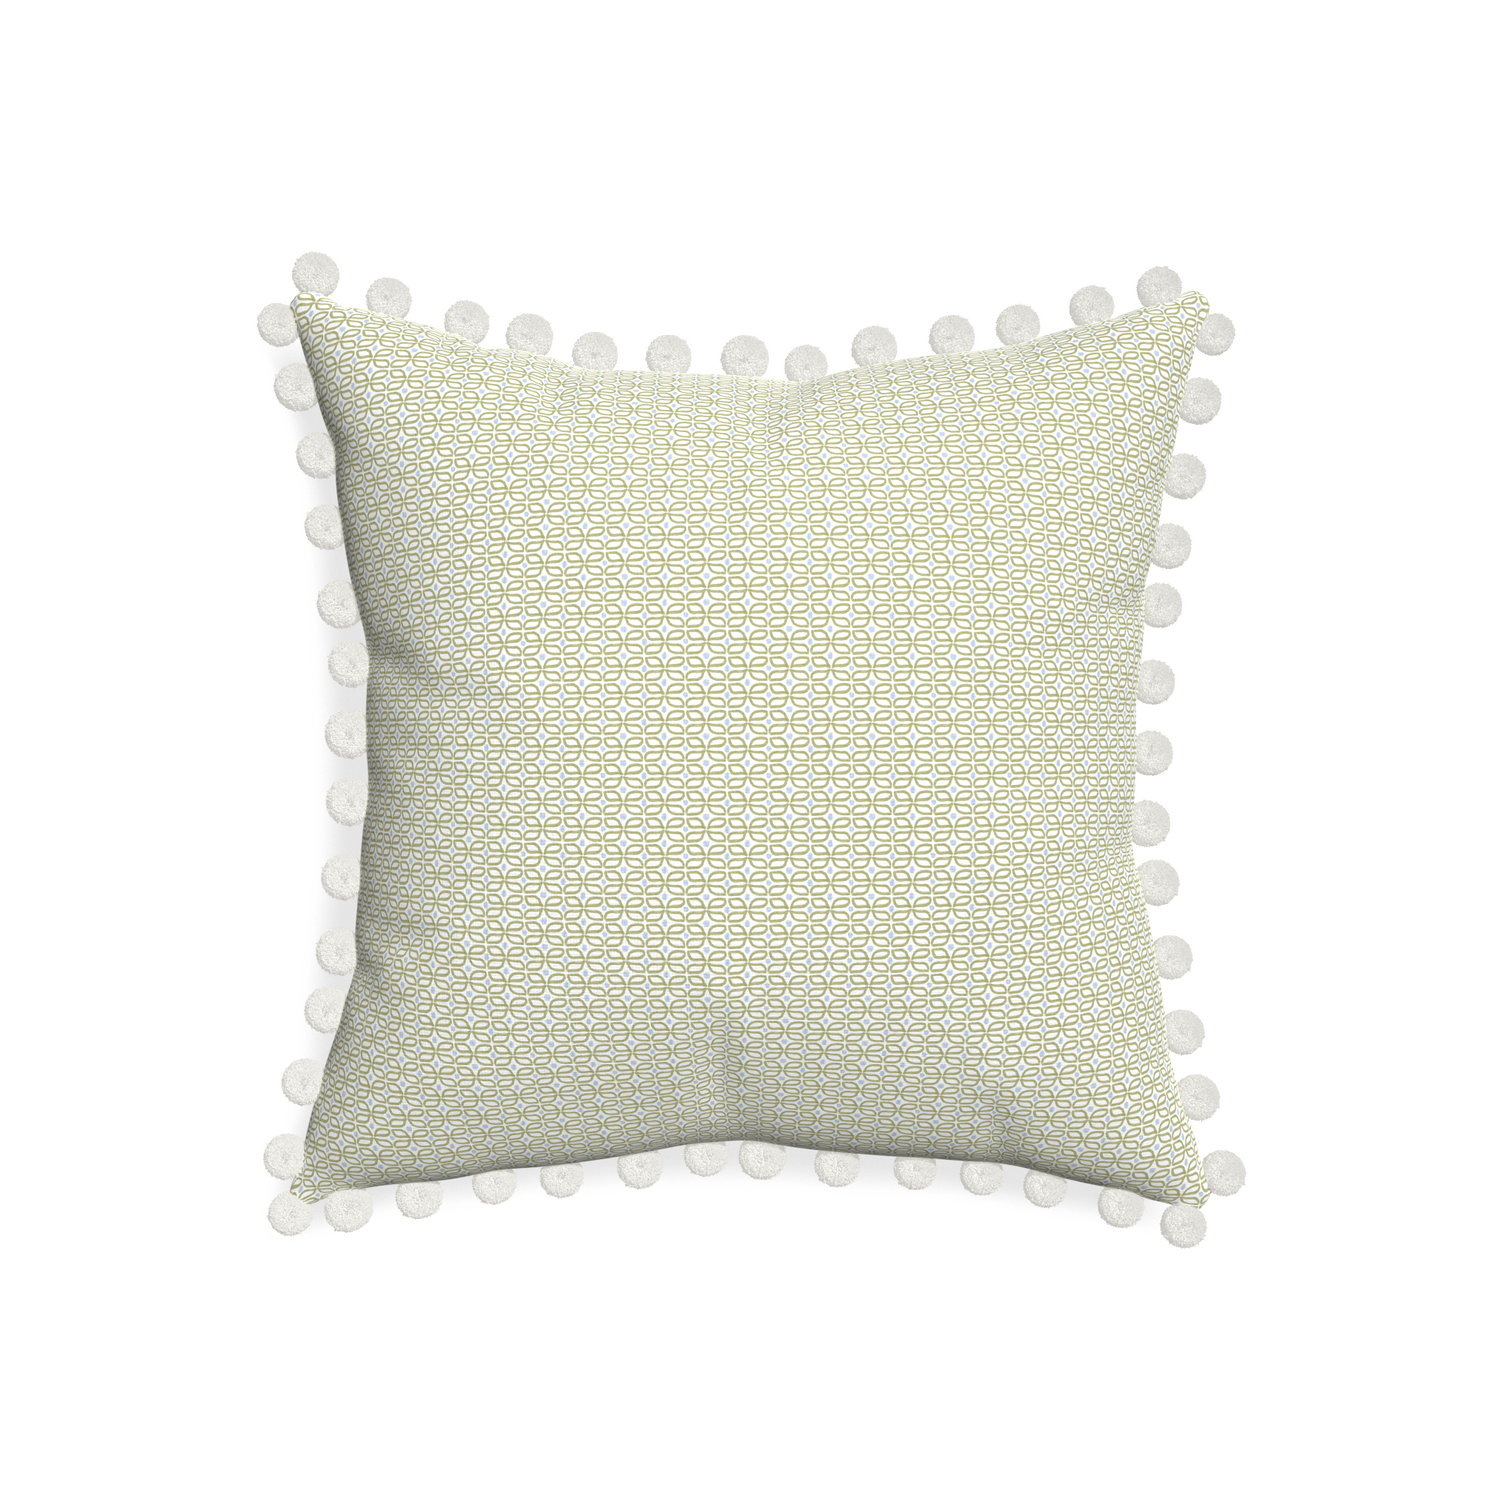 20-square loomi moss custom pillow with snow pom pom on white background